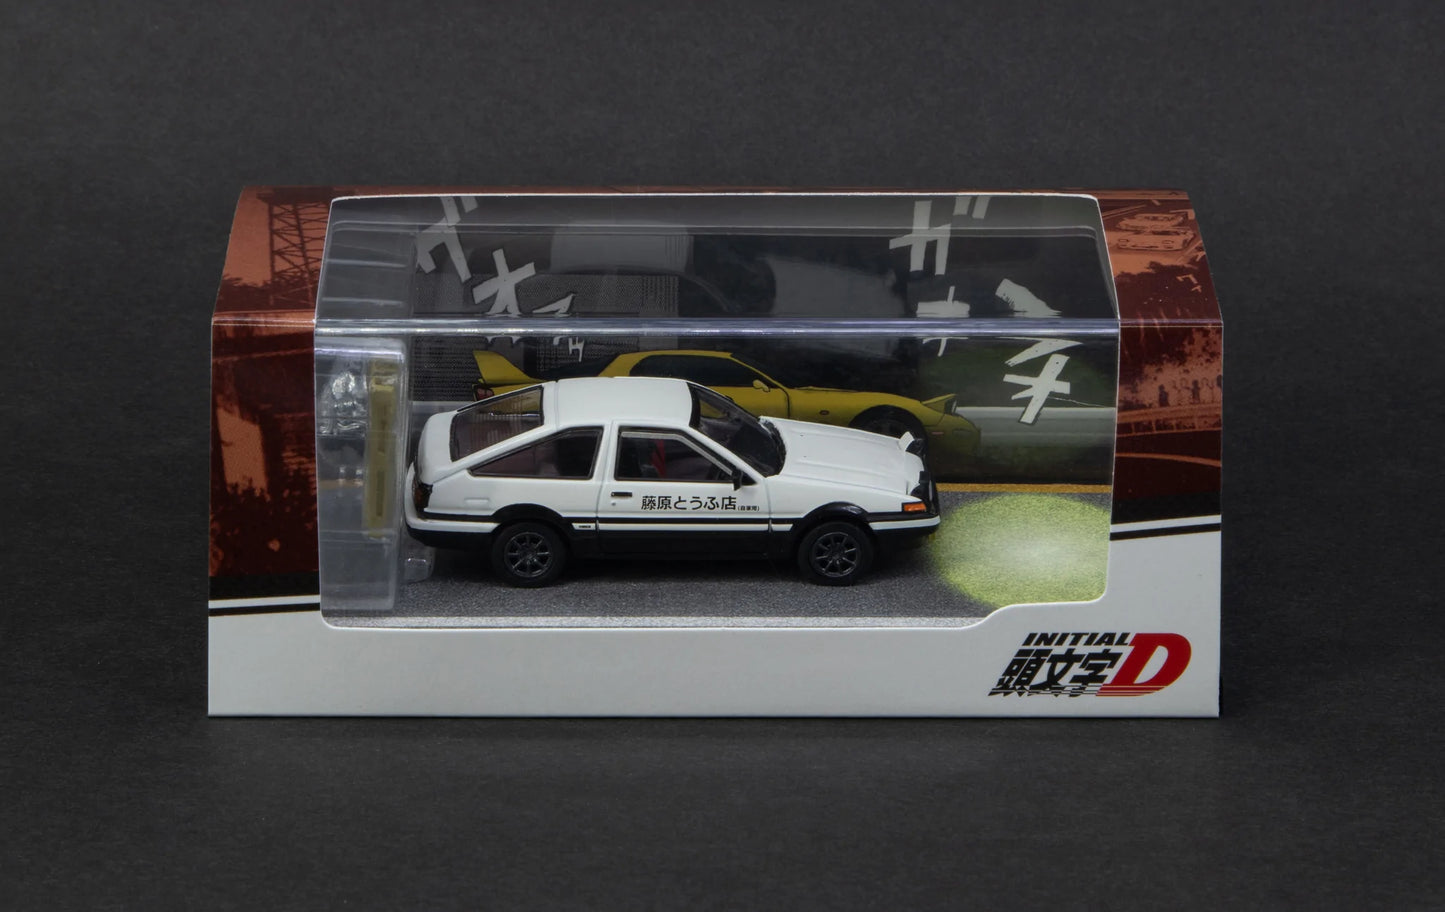 Hobby Japan - Toyota Corolla Sprinter Tureno GT Apex (AE86) "Initial D" (Lights Up) 1:64 Scale Model Car